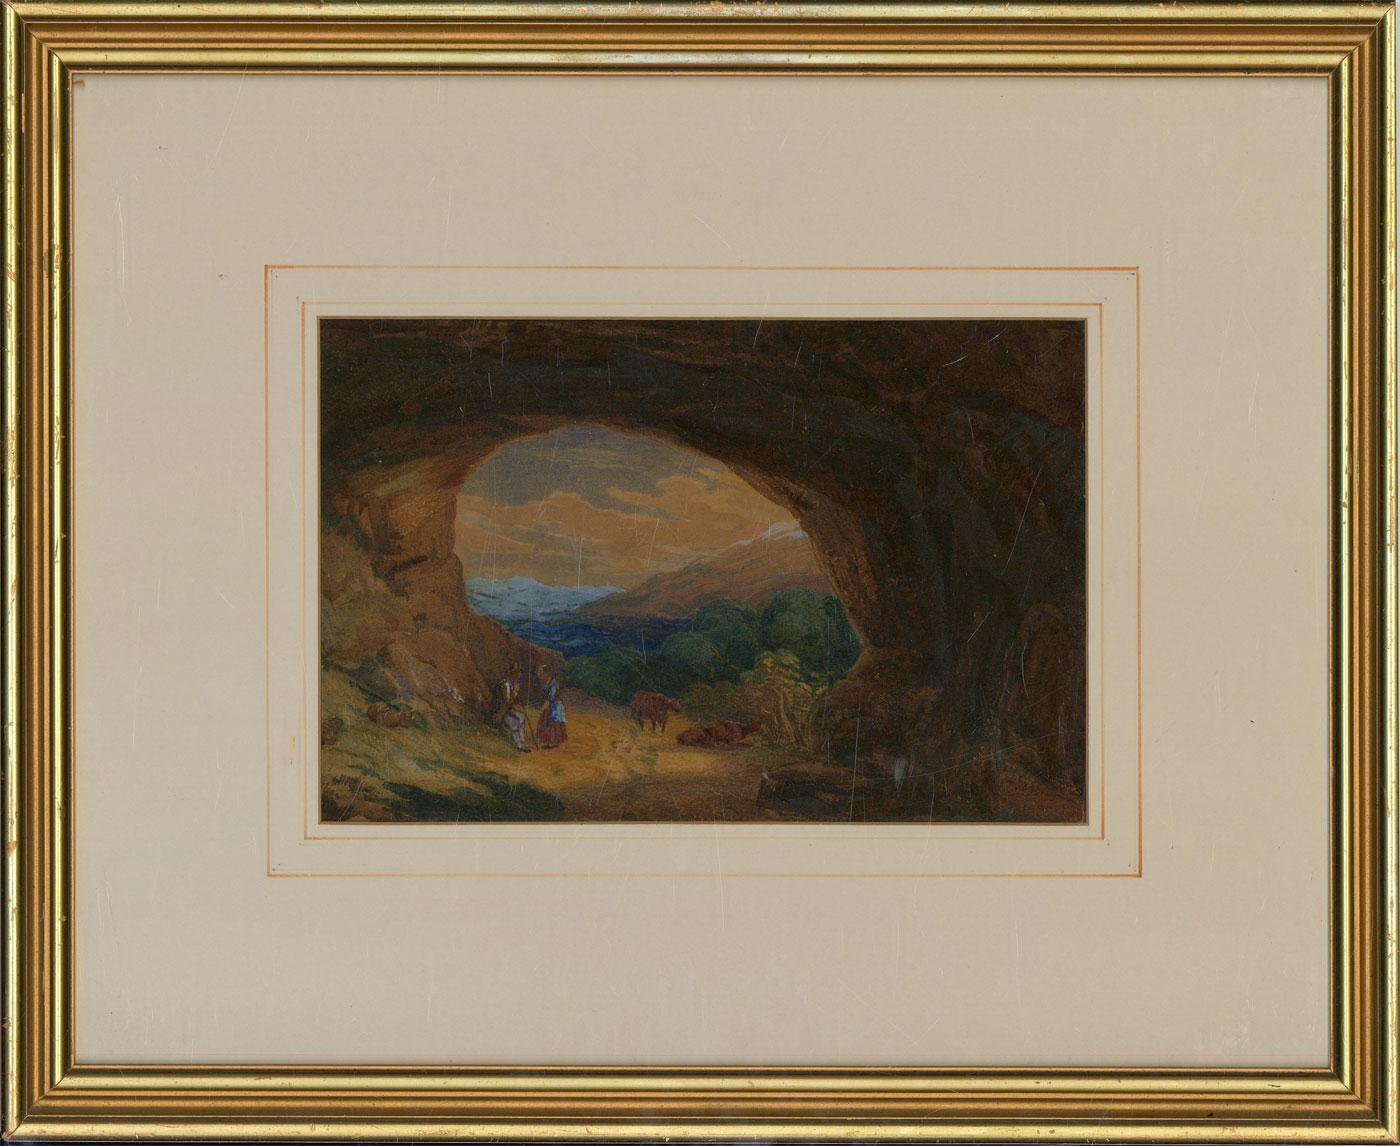 Unknown Landscape Art - Mid 19th Century Watercolour - In the Cave